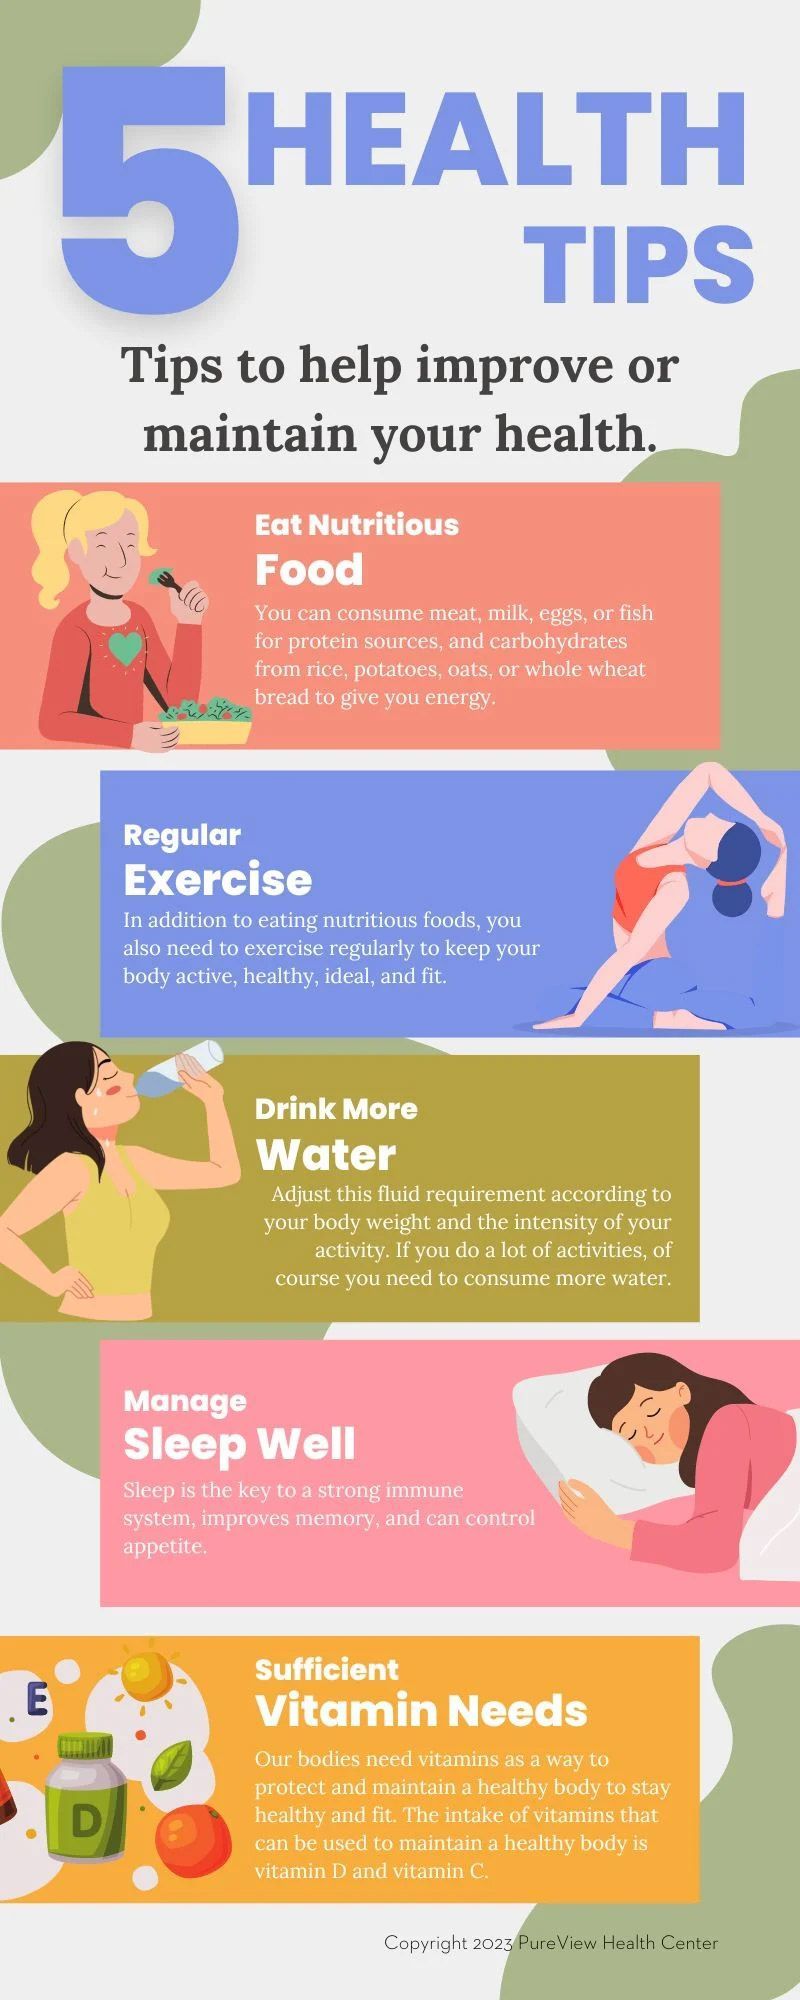 A poster with five health tips to help improve or maintain your health.